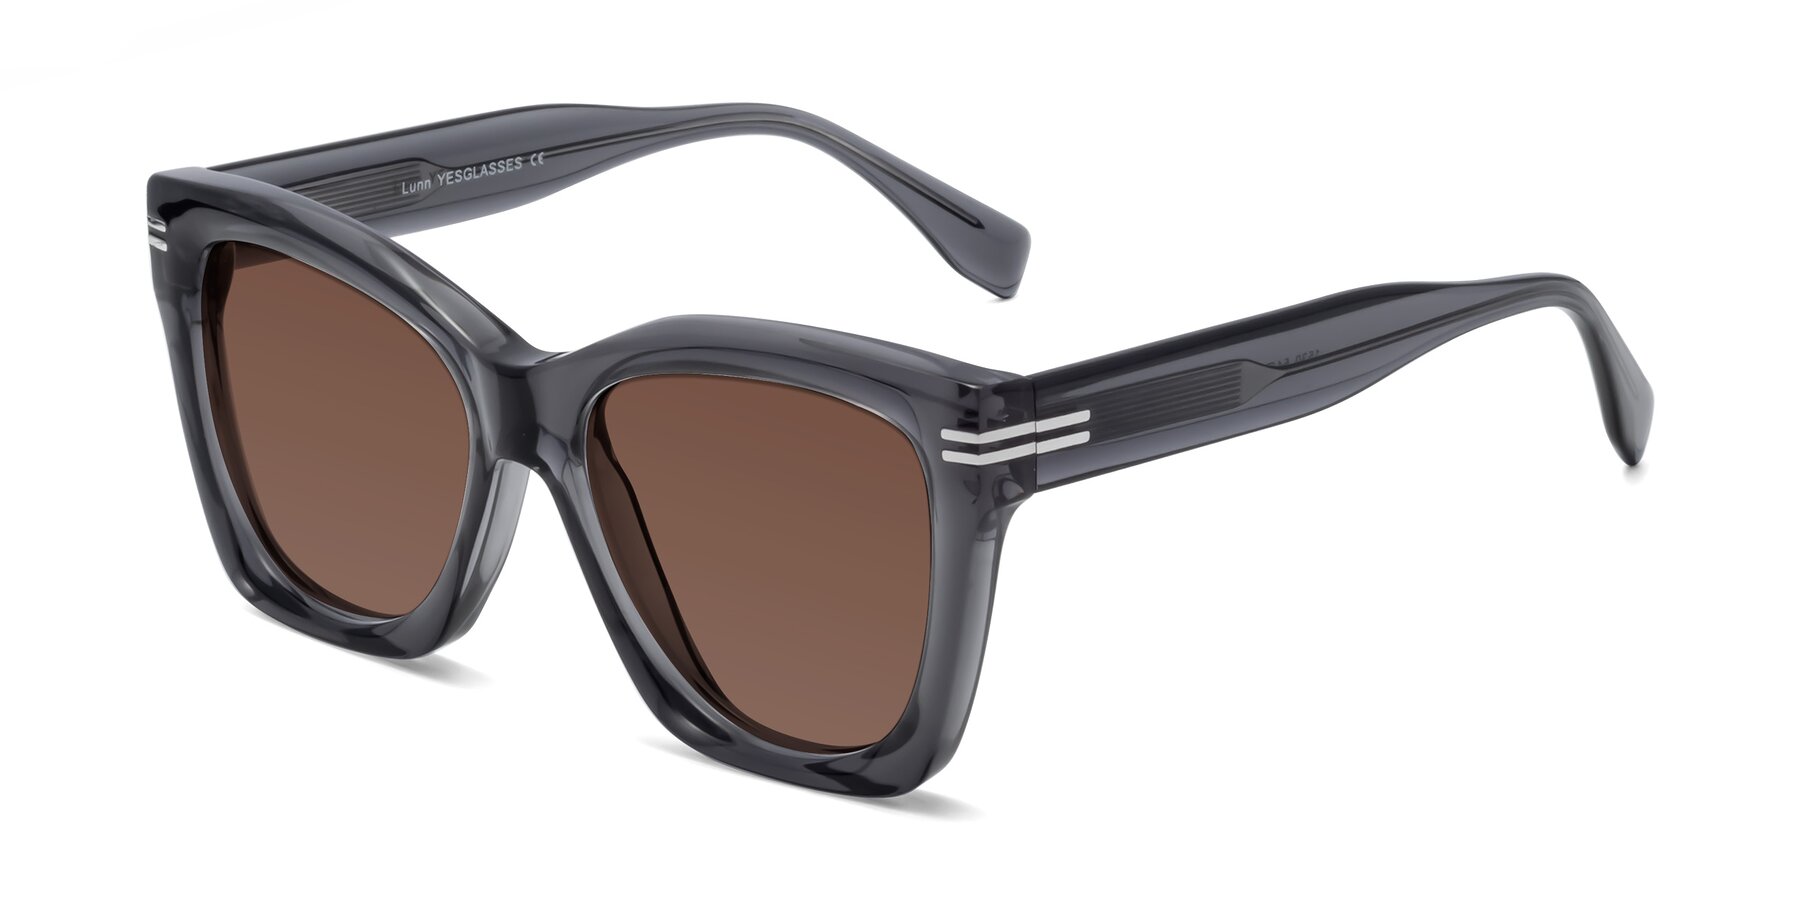 Angle of Lunn in Translucent Gray with Brown Tinted Lenses